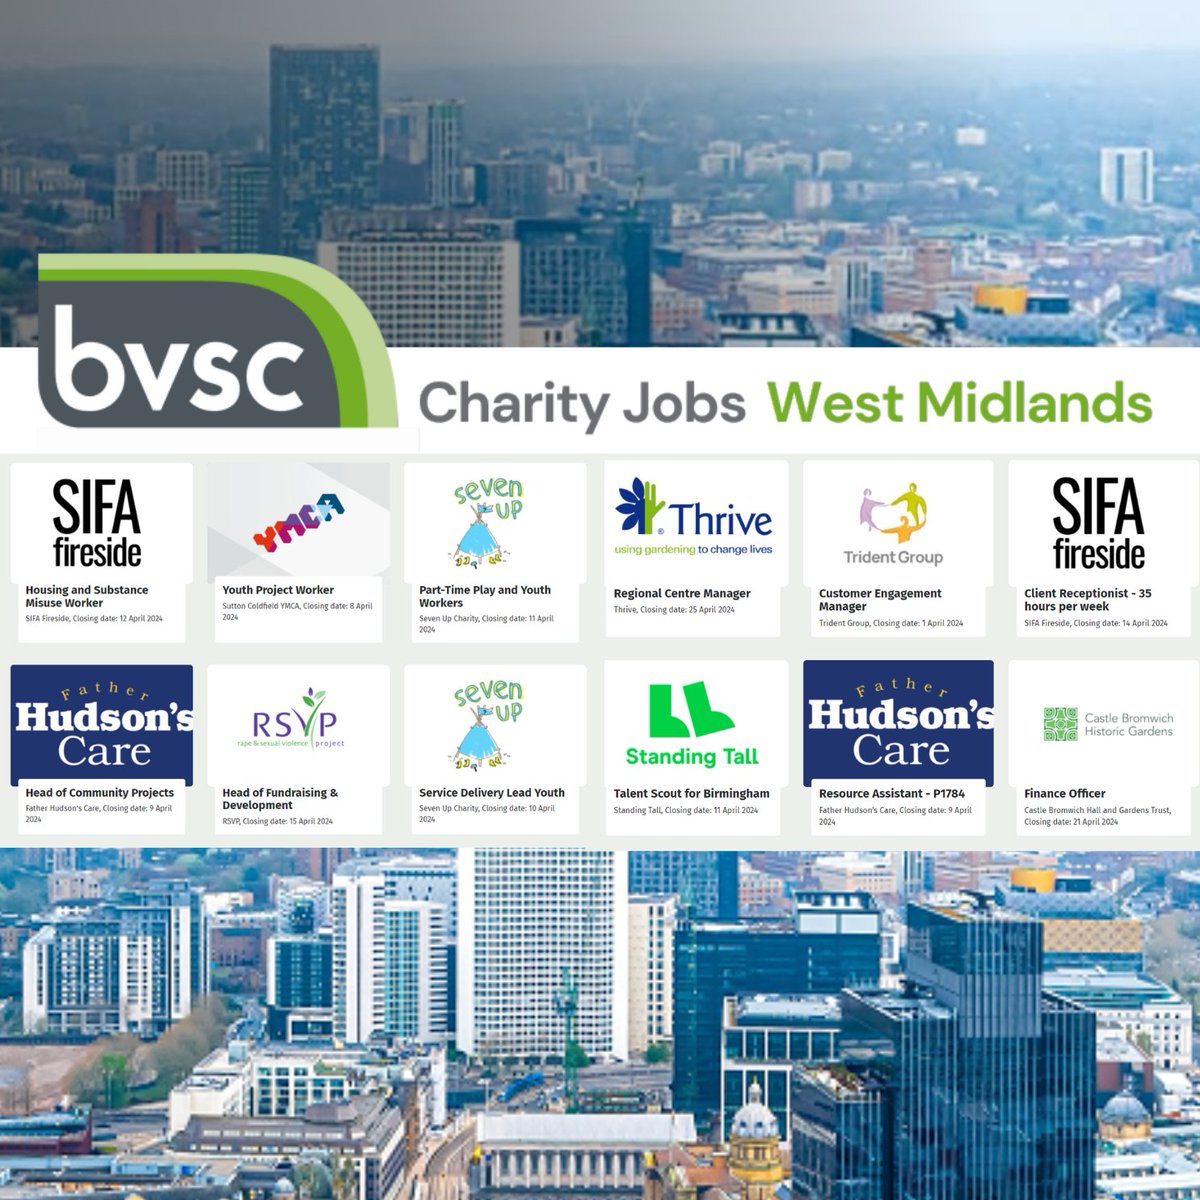 Are you looking for a #charityjob in the #WestMidlands? Check out our @BVSCWMJobs website where you'll find a whole range of current vacancies. #jobsearch #jobs bvsc.org/bvsc-charity-j…